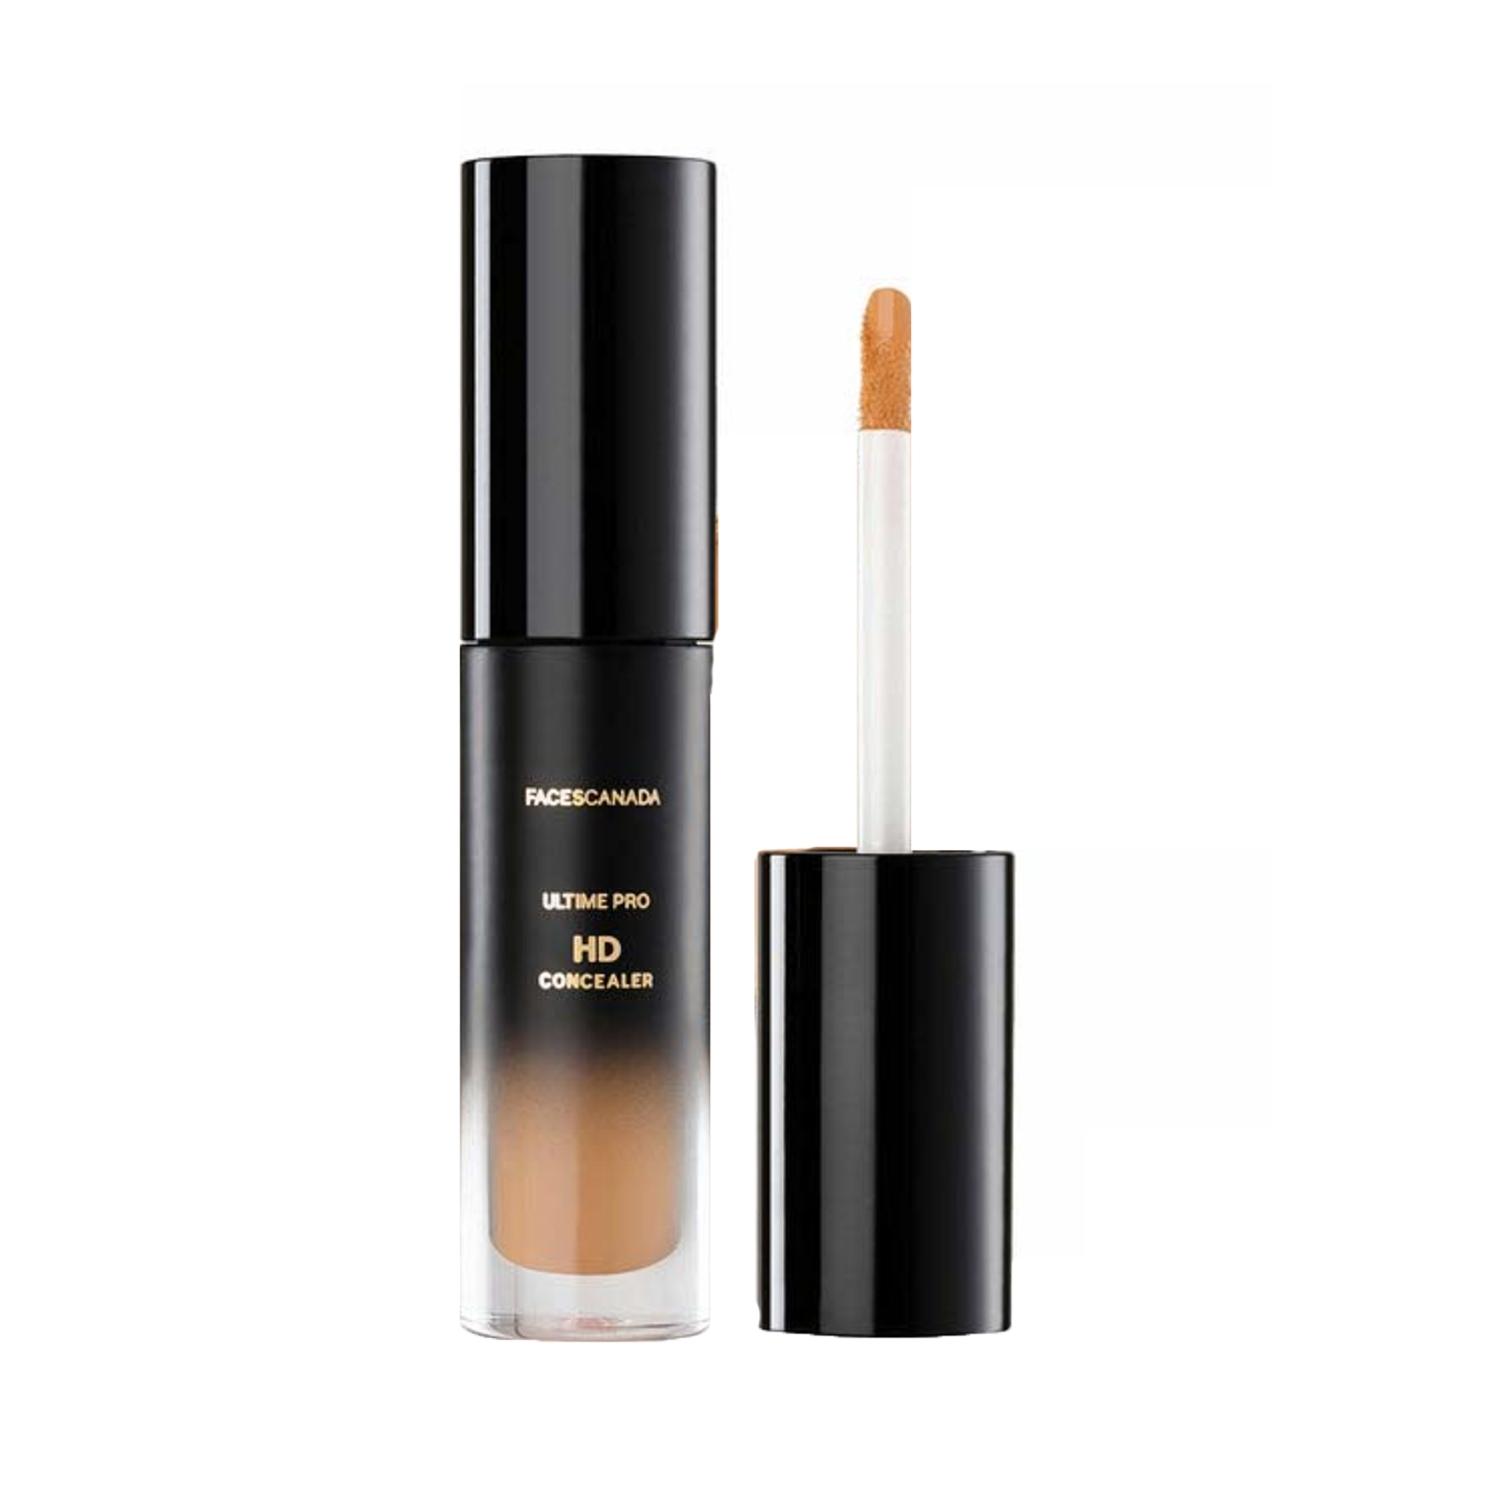 faces canada ultime pro hd concealer - 04 toffee love (3.8ml)